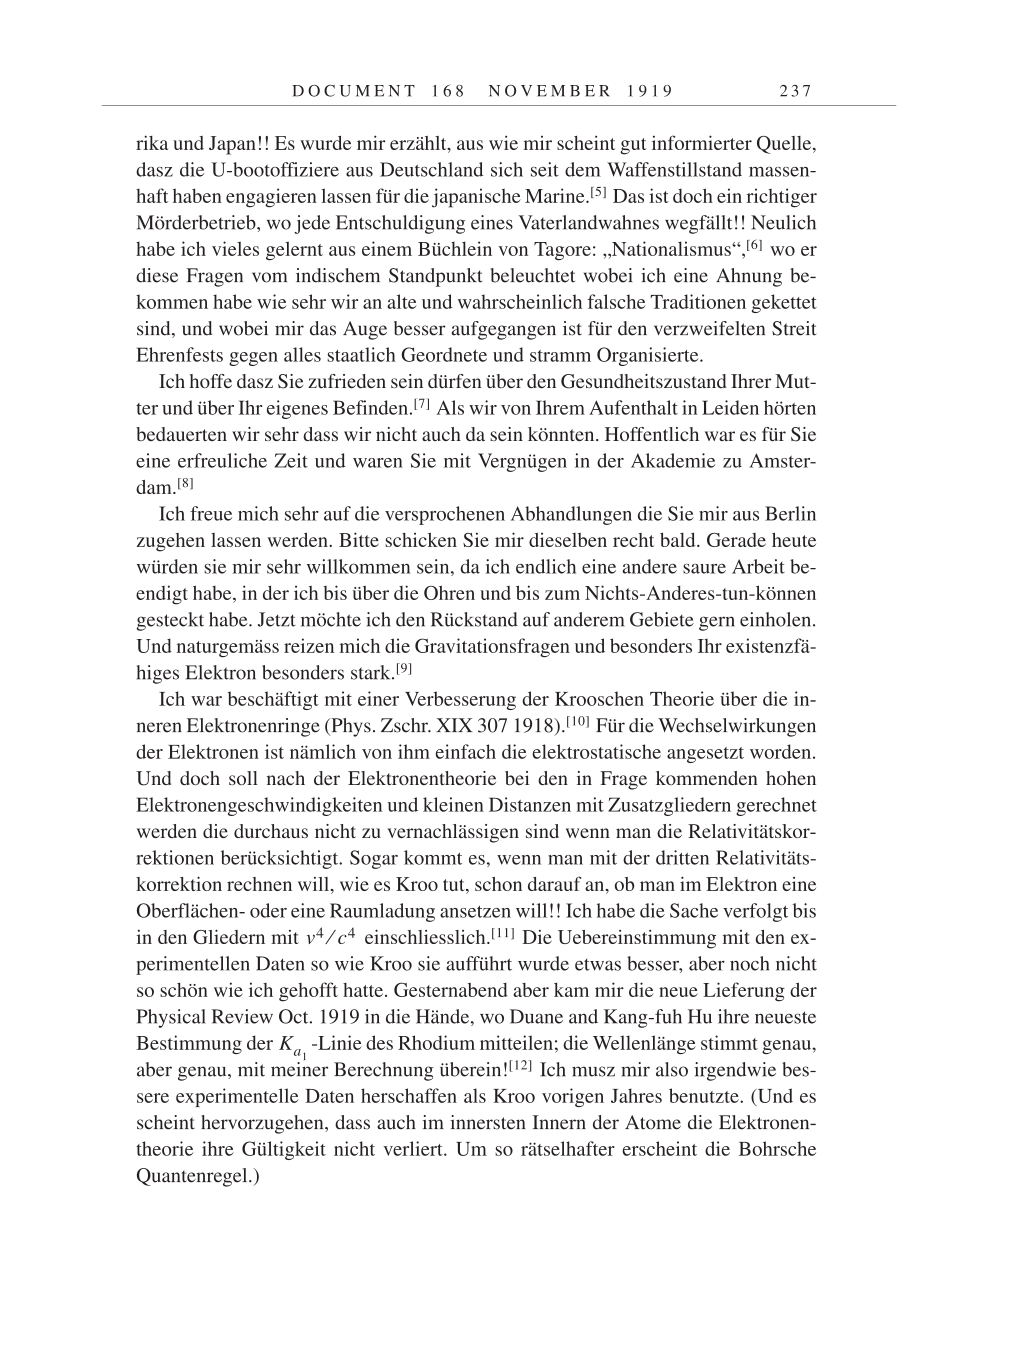 Volume 9: The Berlin Years: Correspondence January 1919-April 1920 page 237